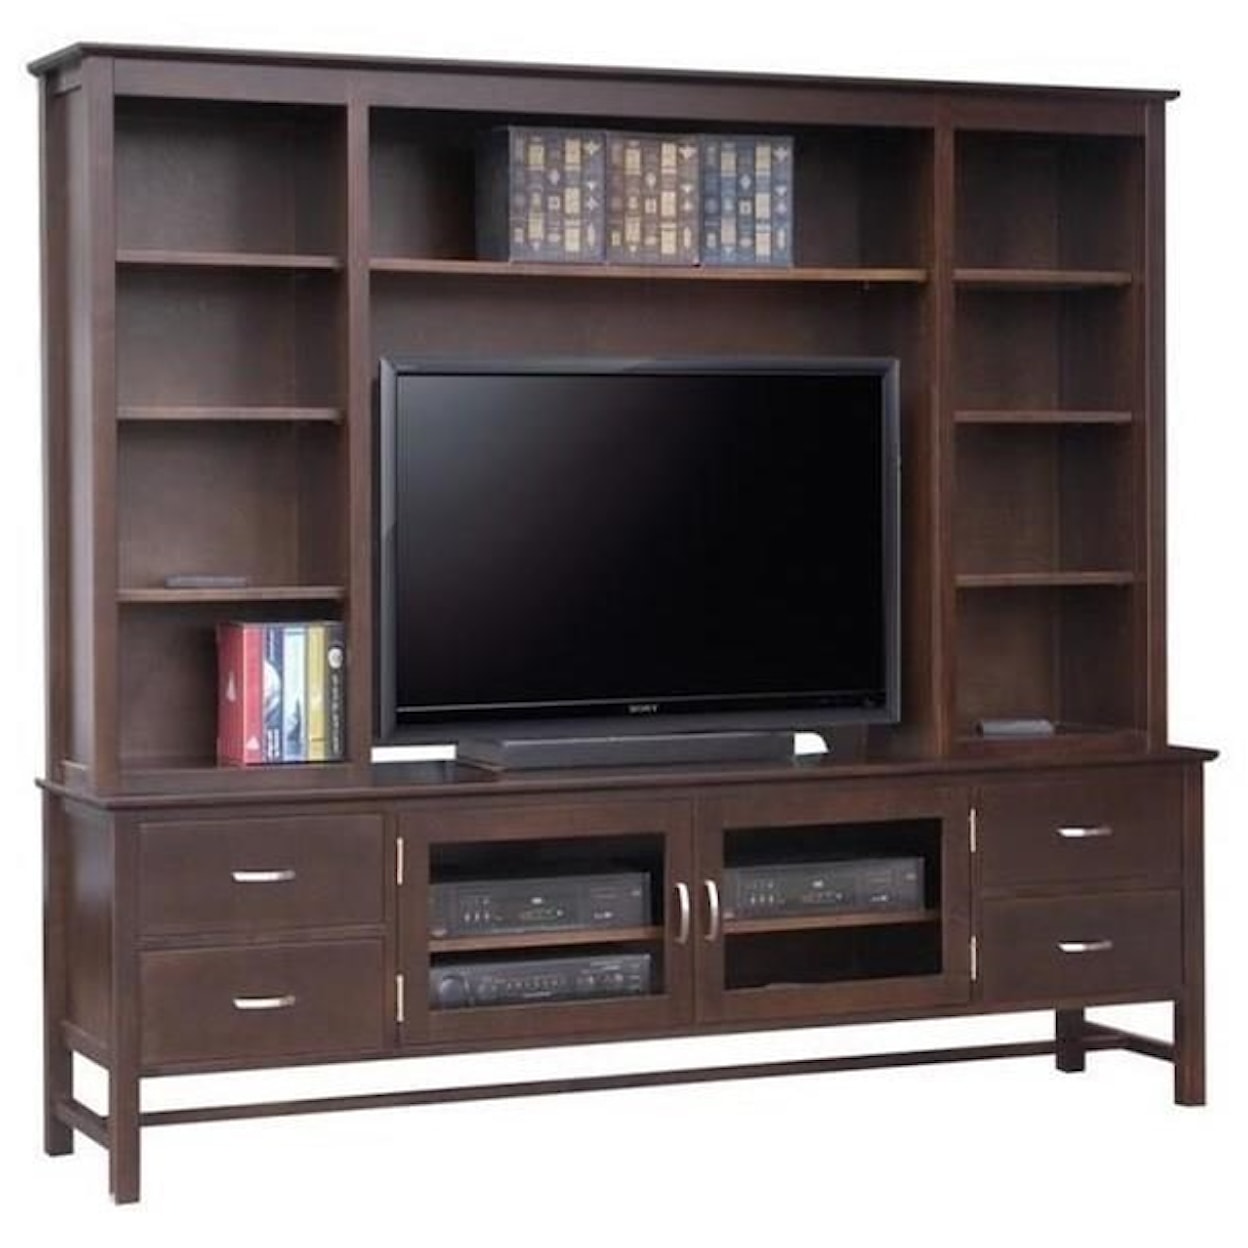 Handstone Brooklyn 84" HDTV Cabinet with Hutch